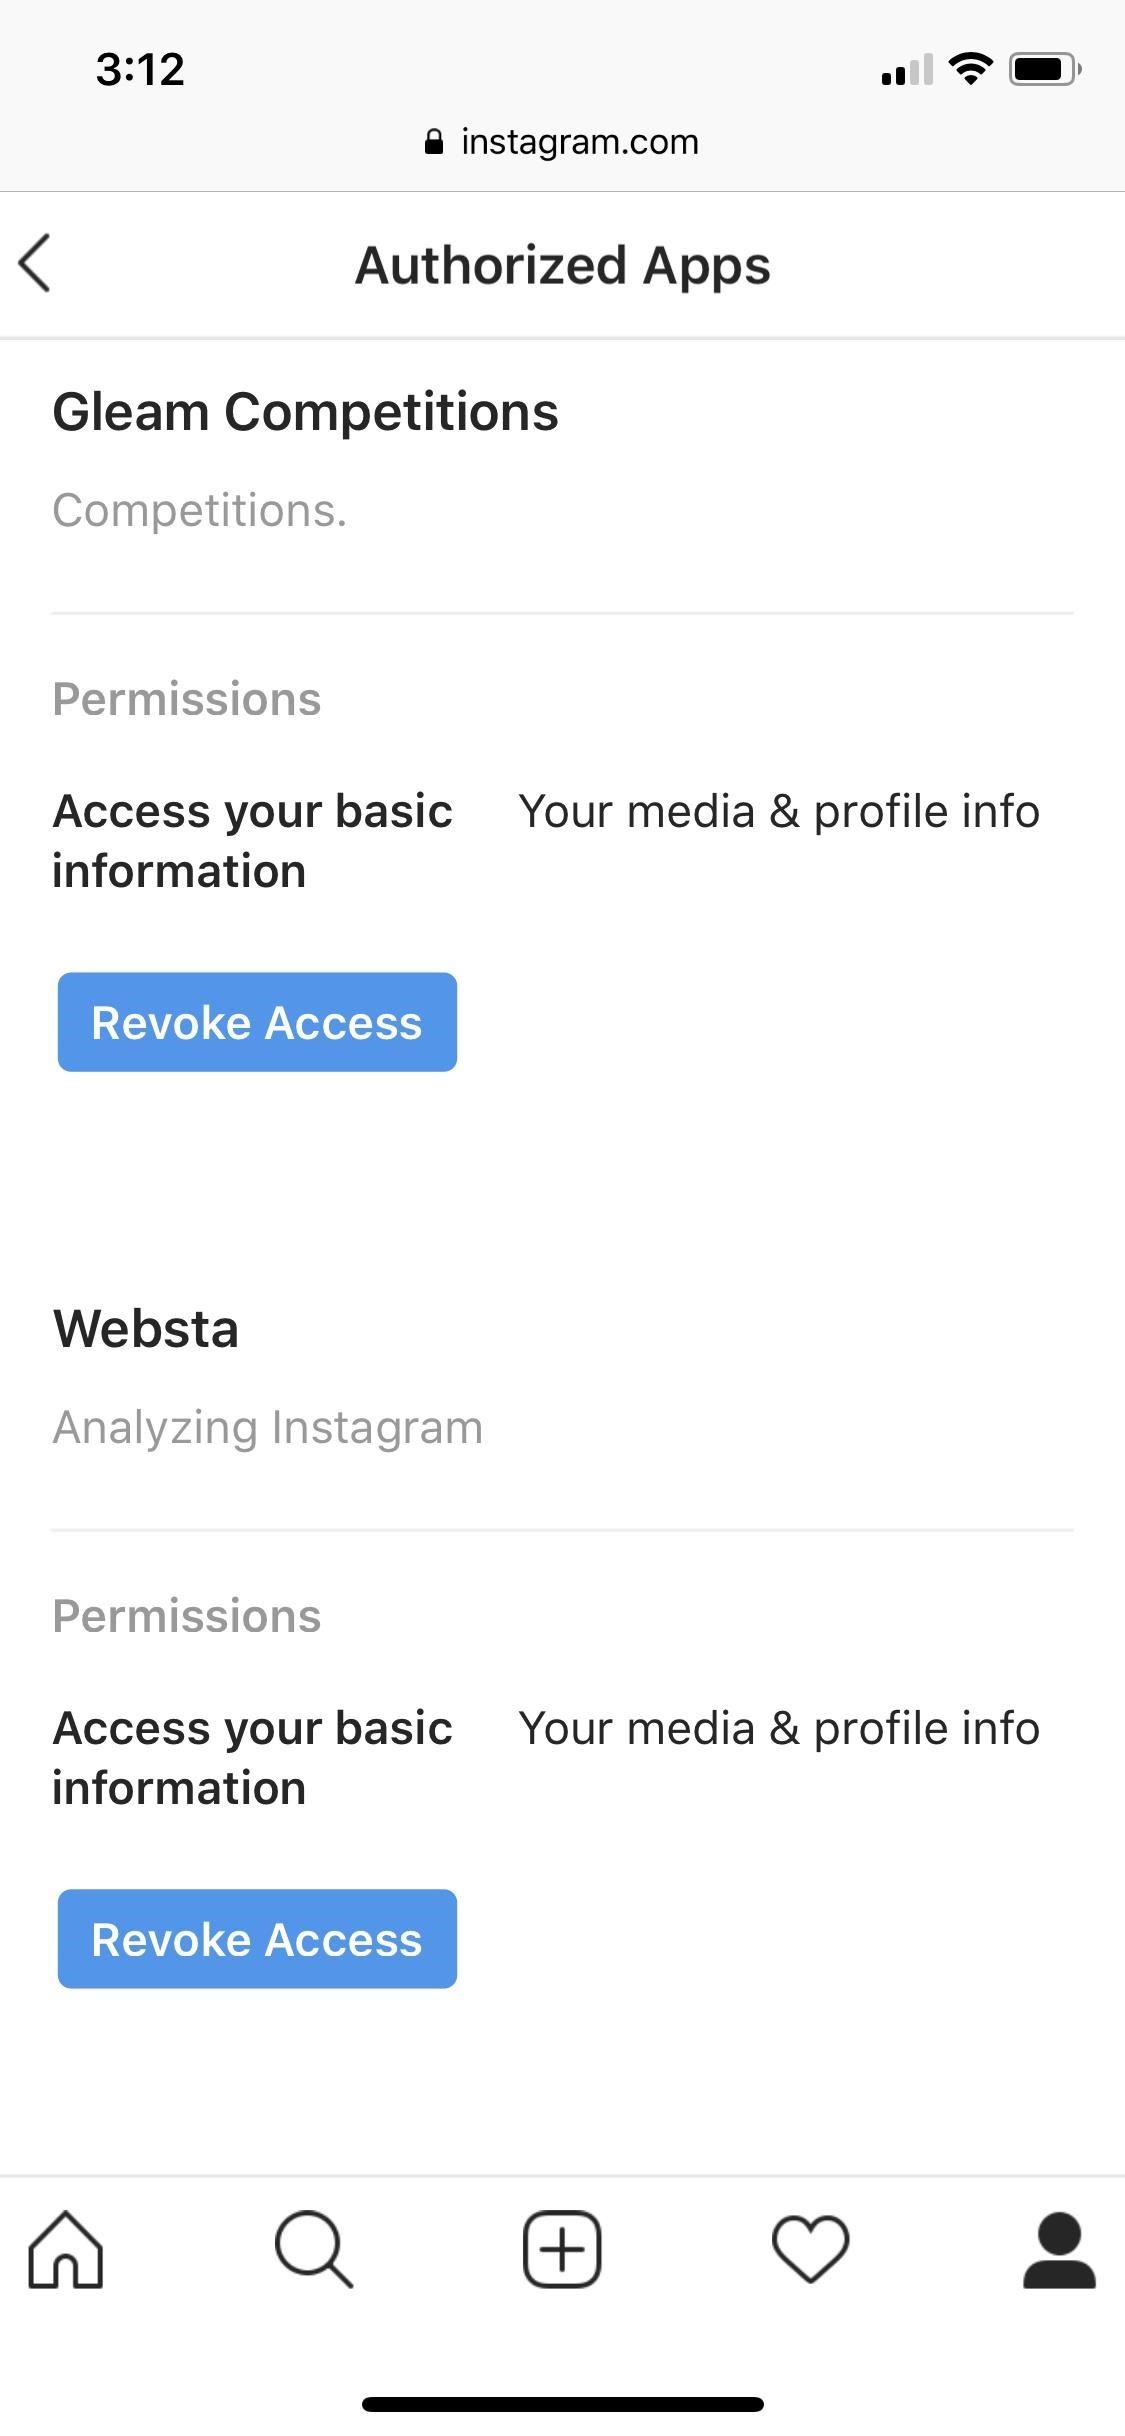 How to Stop Third-Party Apps You Never Authorized or No Longer Use from Accessing Your Instagram Account